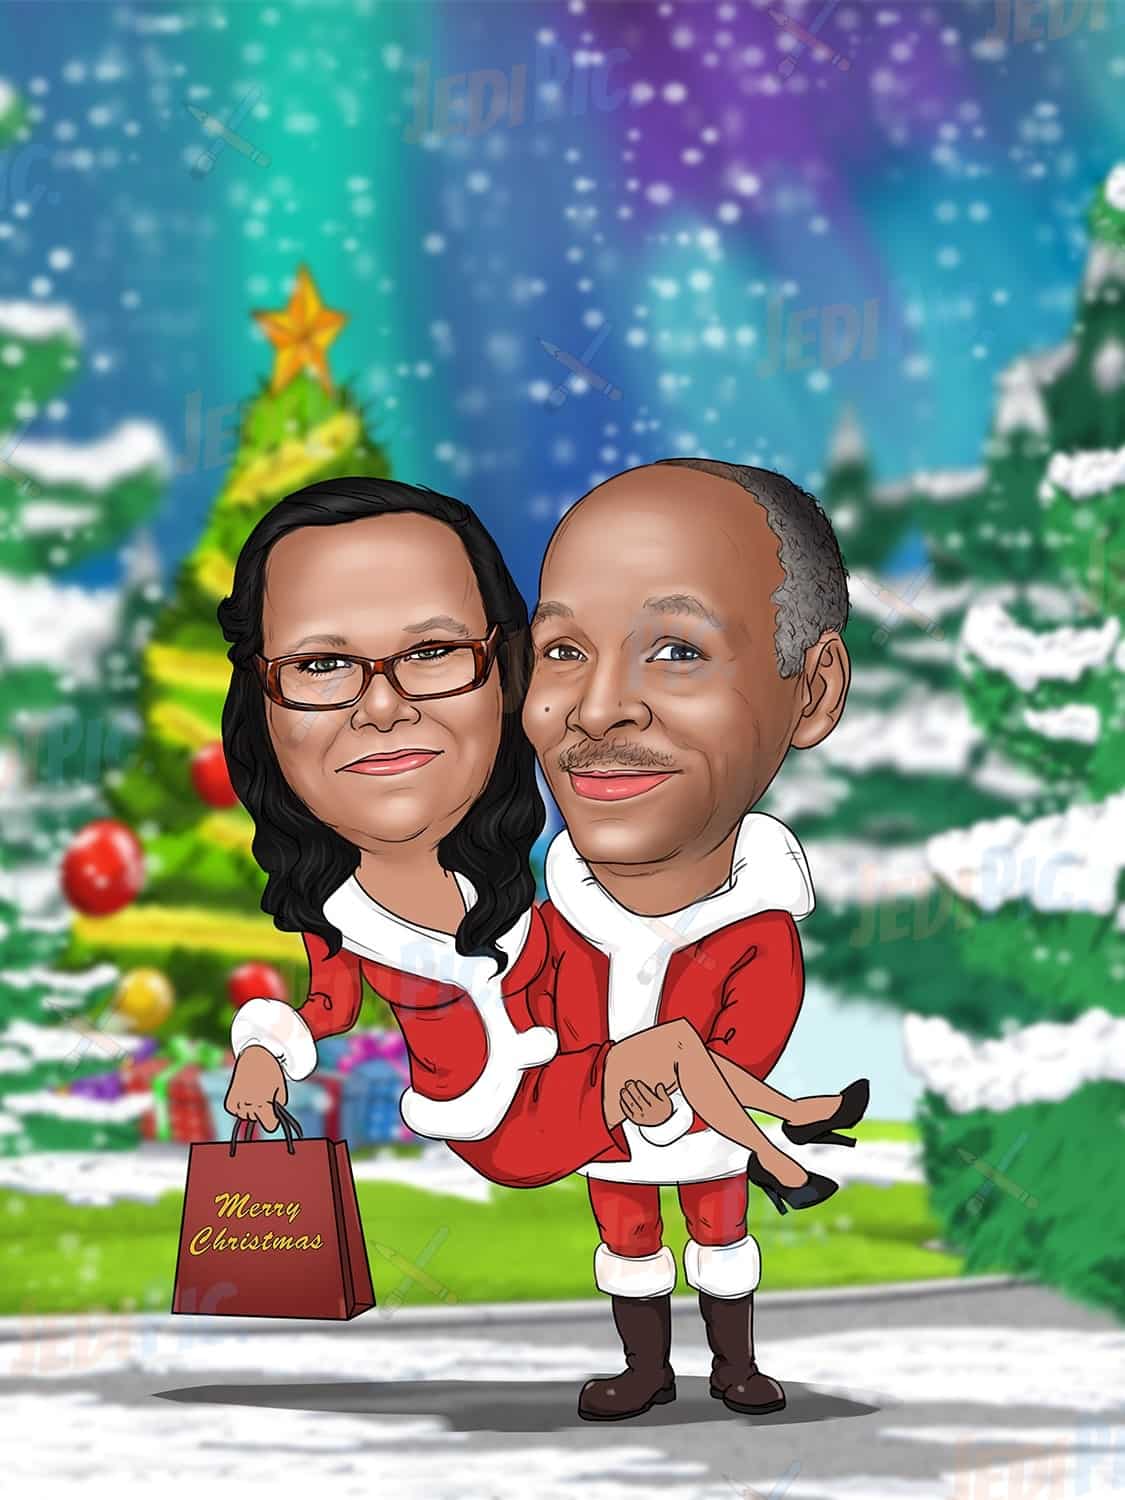 Two Persons Christmas Cartoon Portrait